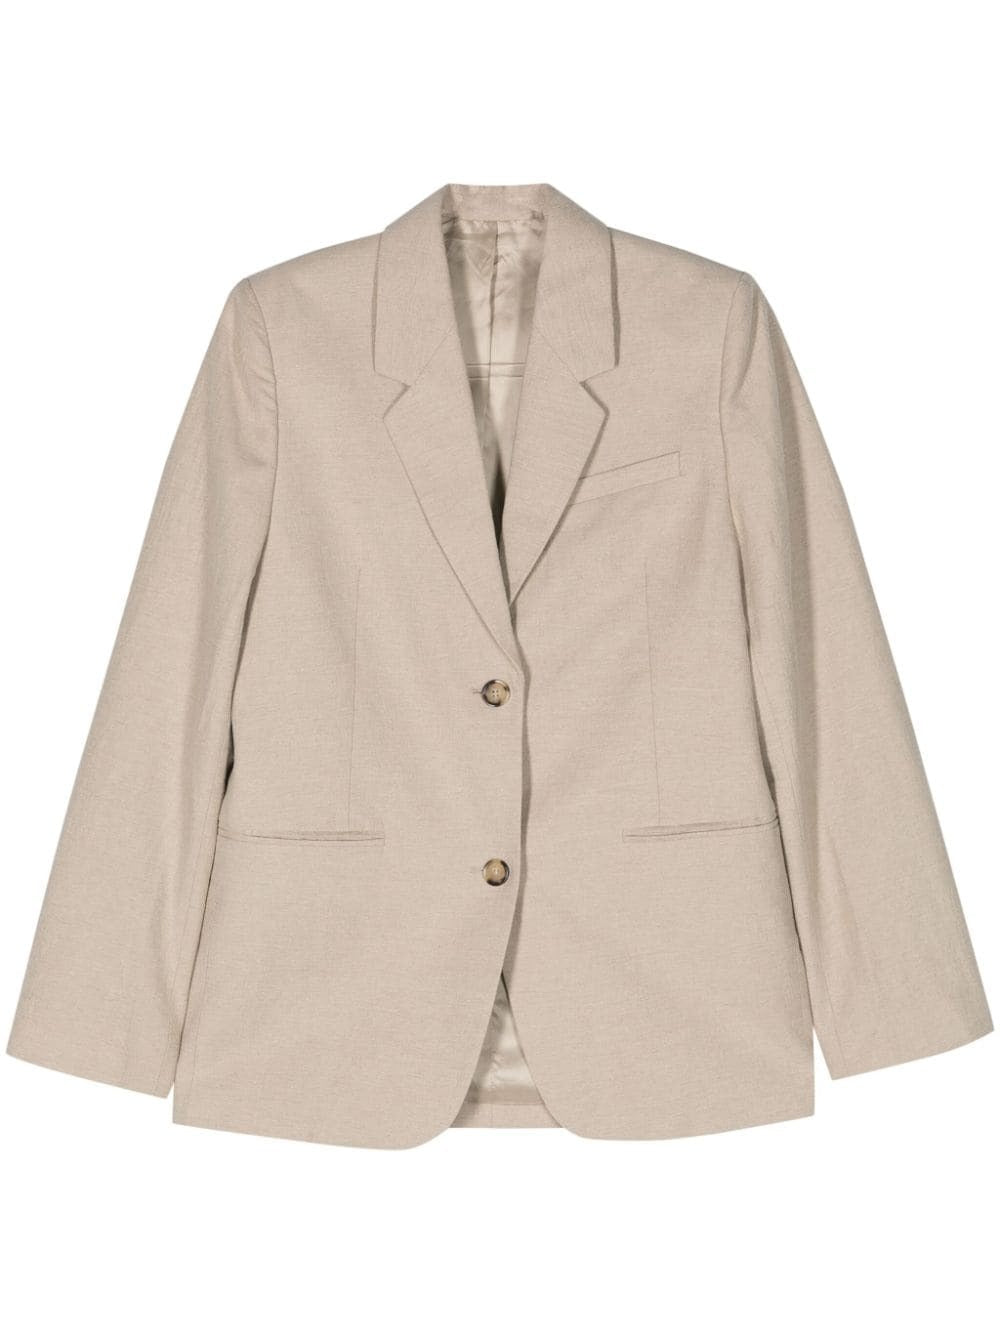 TOTEME-Tailored Suit Jacket-